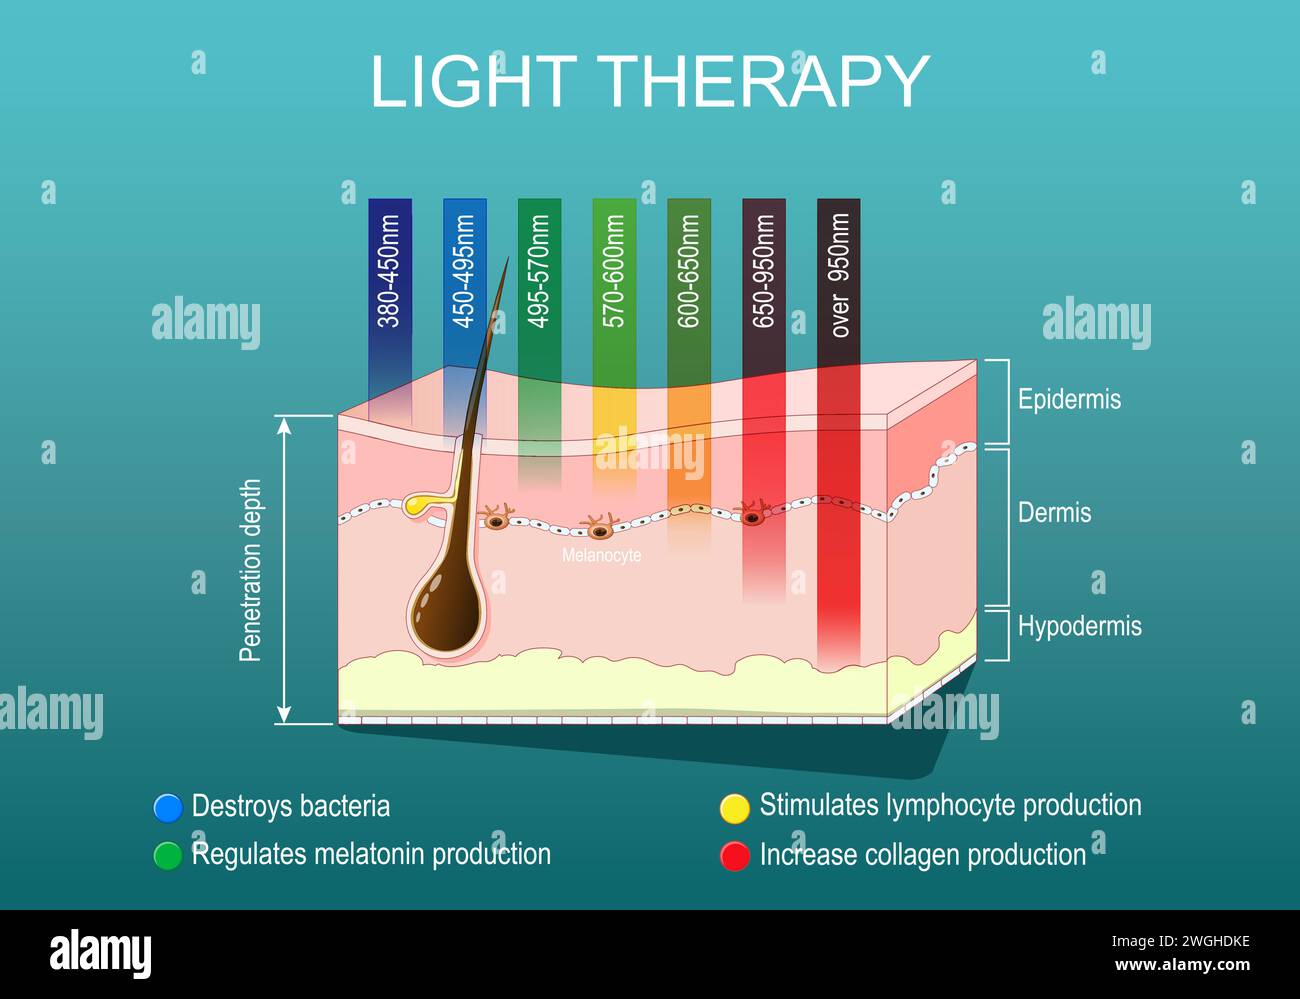 Light therapy for Skin rejuvenation. Phototherapy or laser therapy. Wrinkle reduction. Electromagnetic spectrum with colors of the various wavelengths Stock Vector